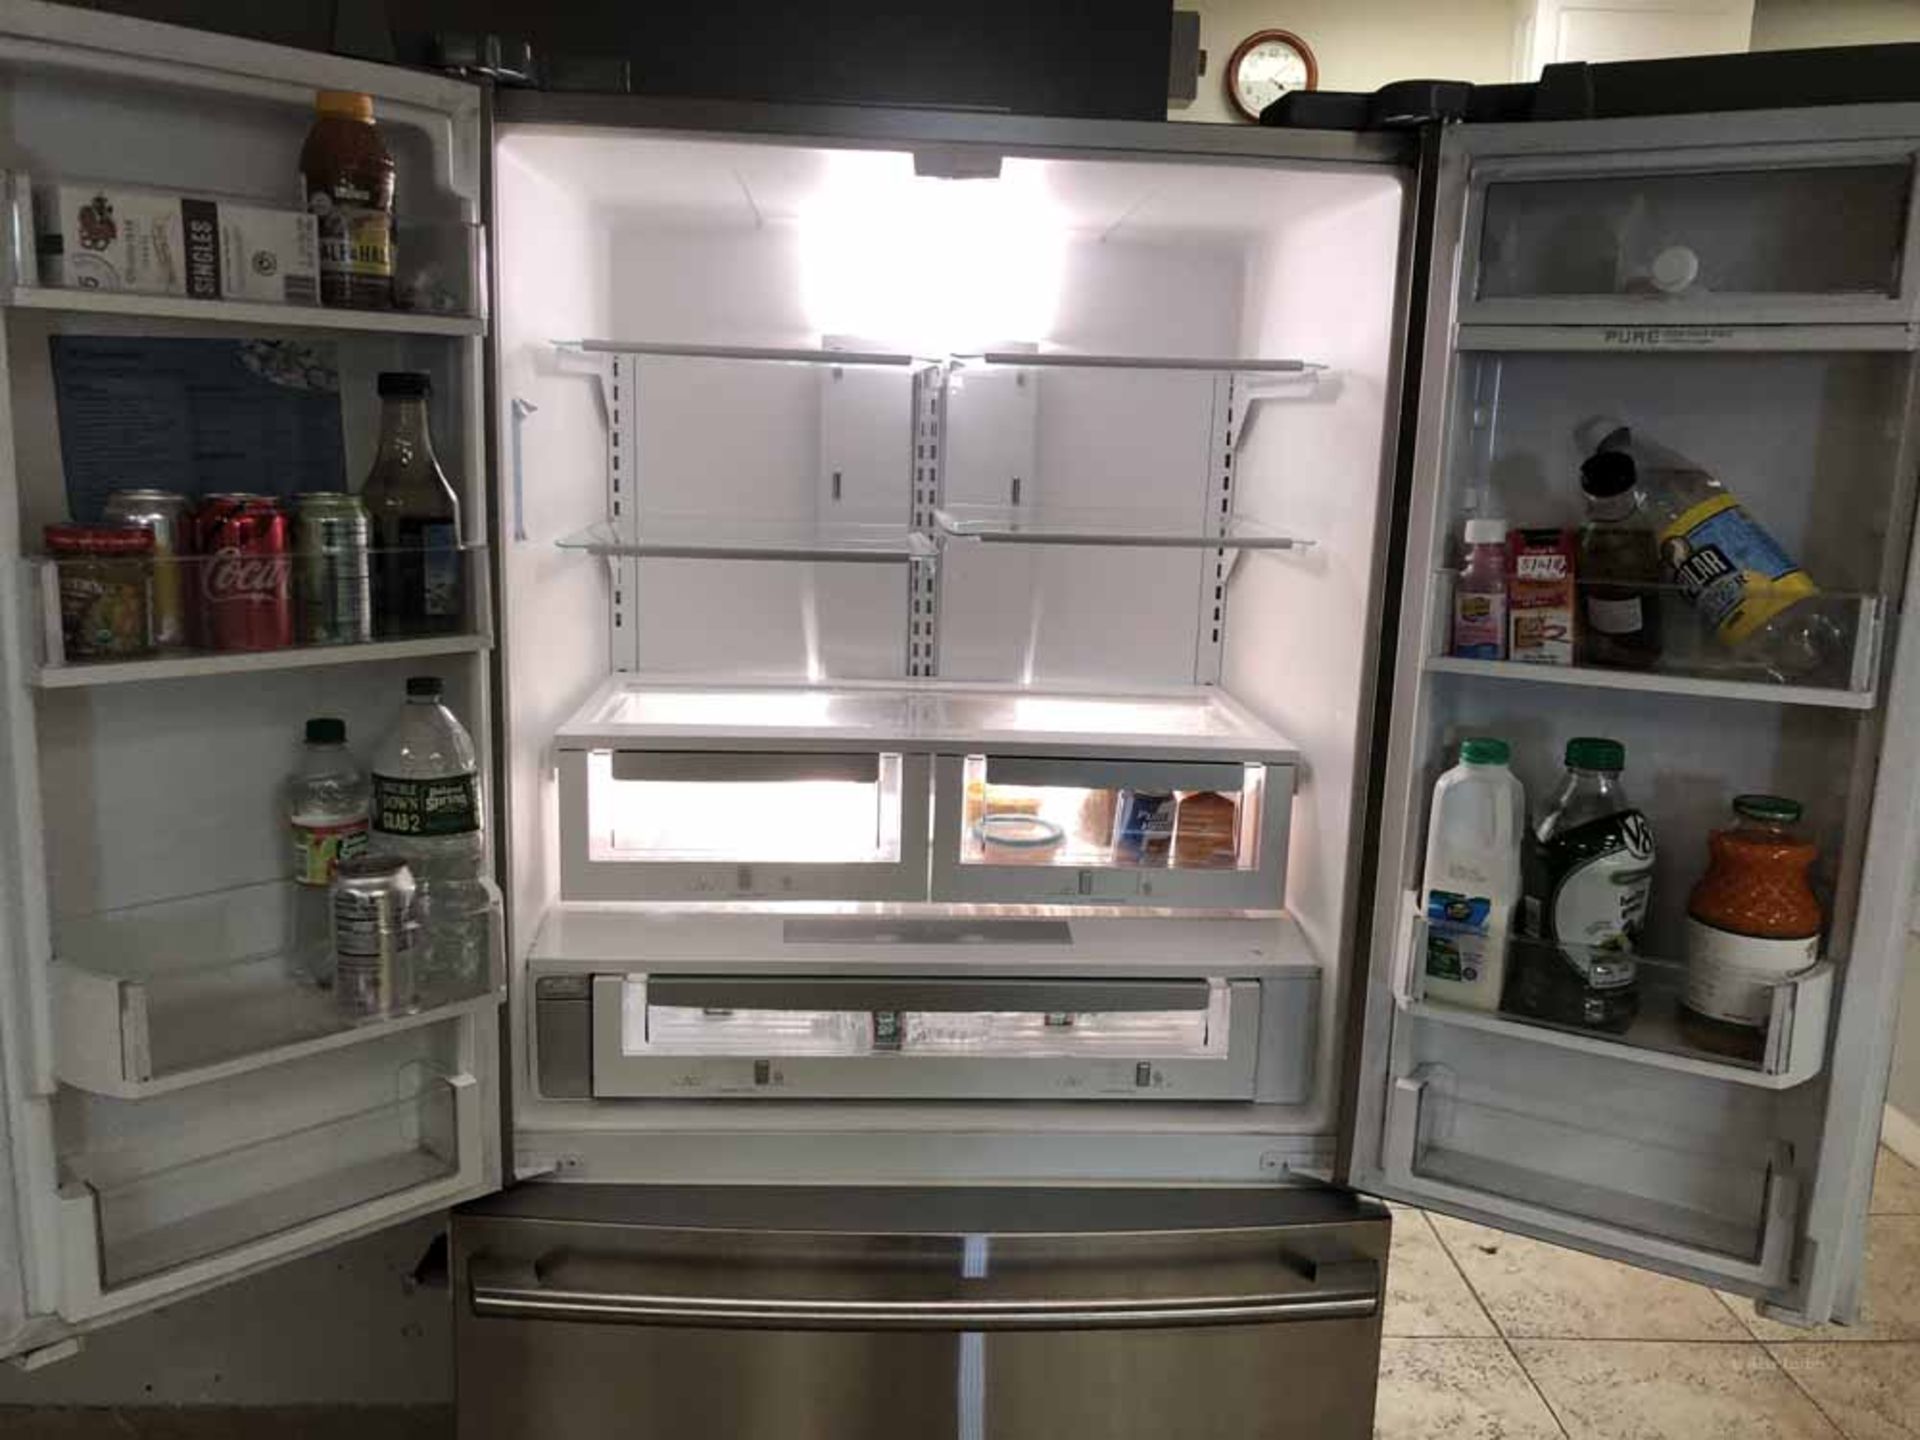 Electrolux Refrigerator (freezer non-opperable) - Image 2 of 3